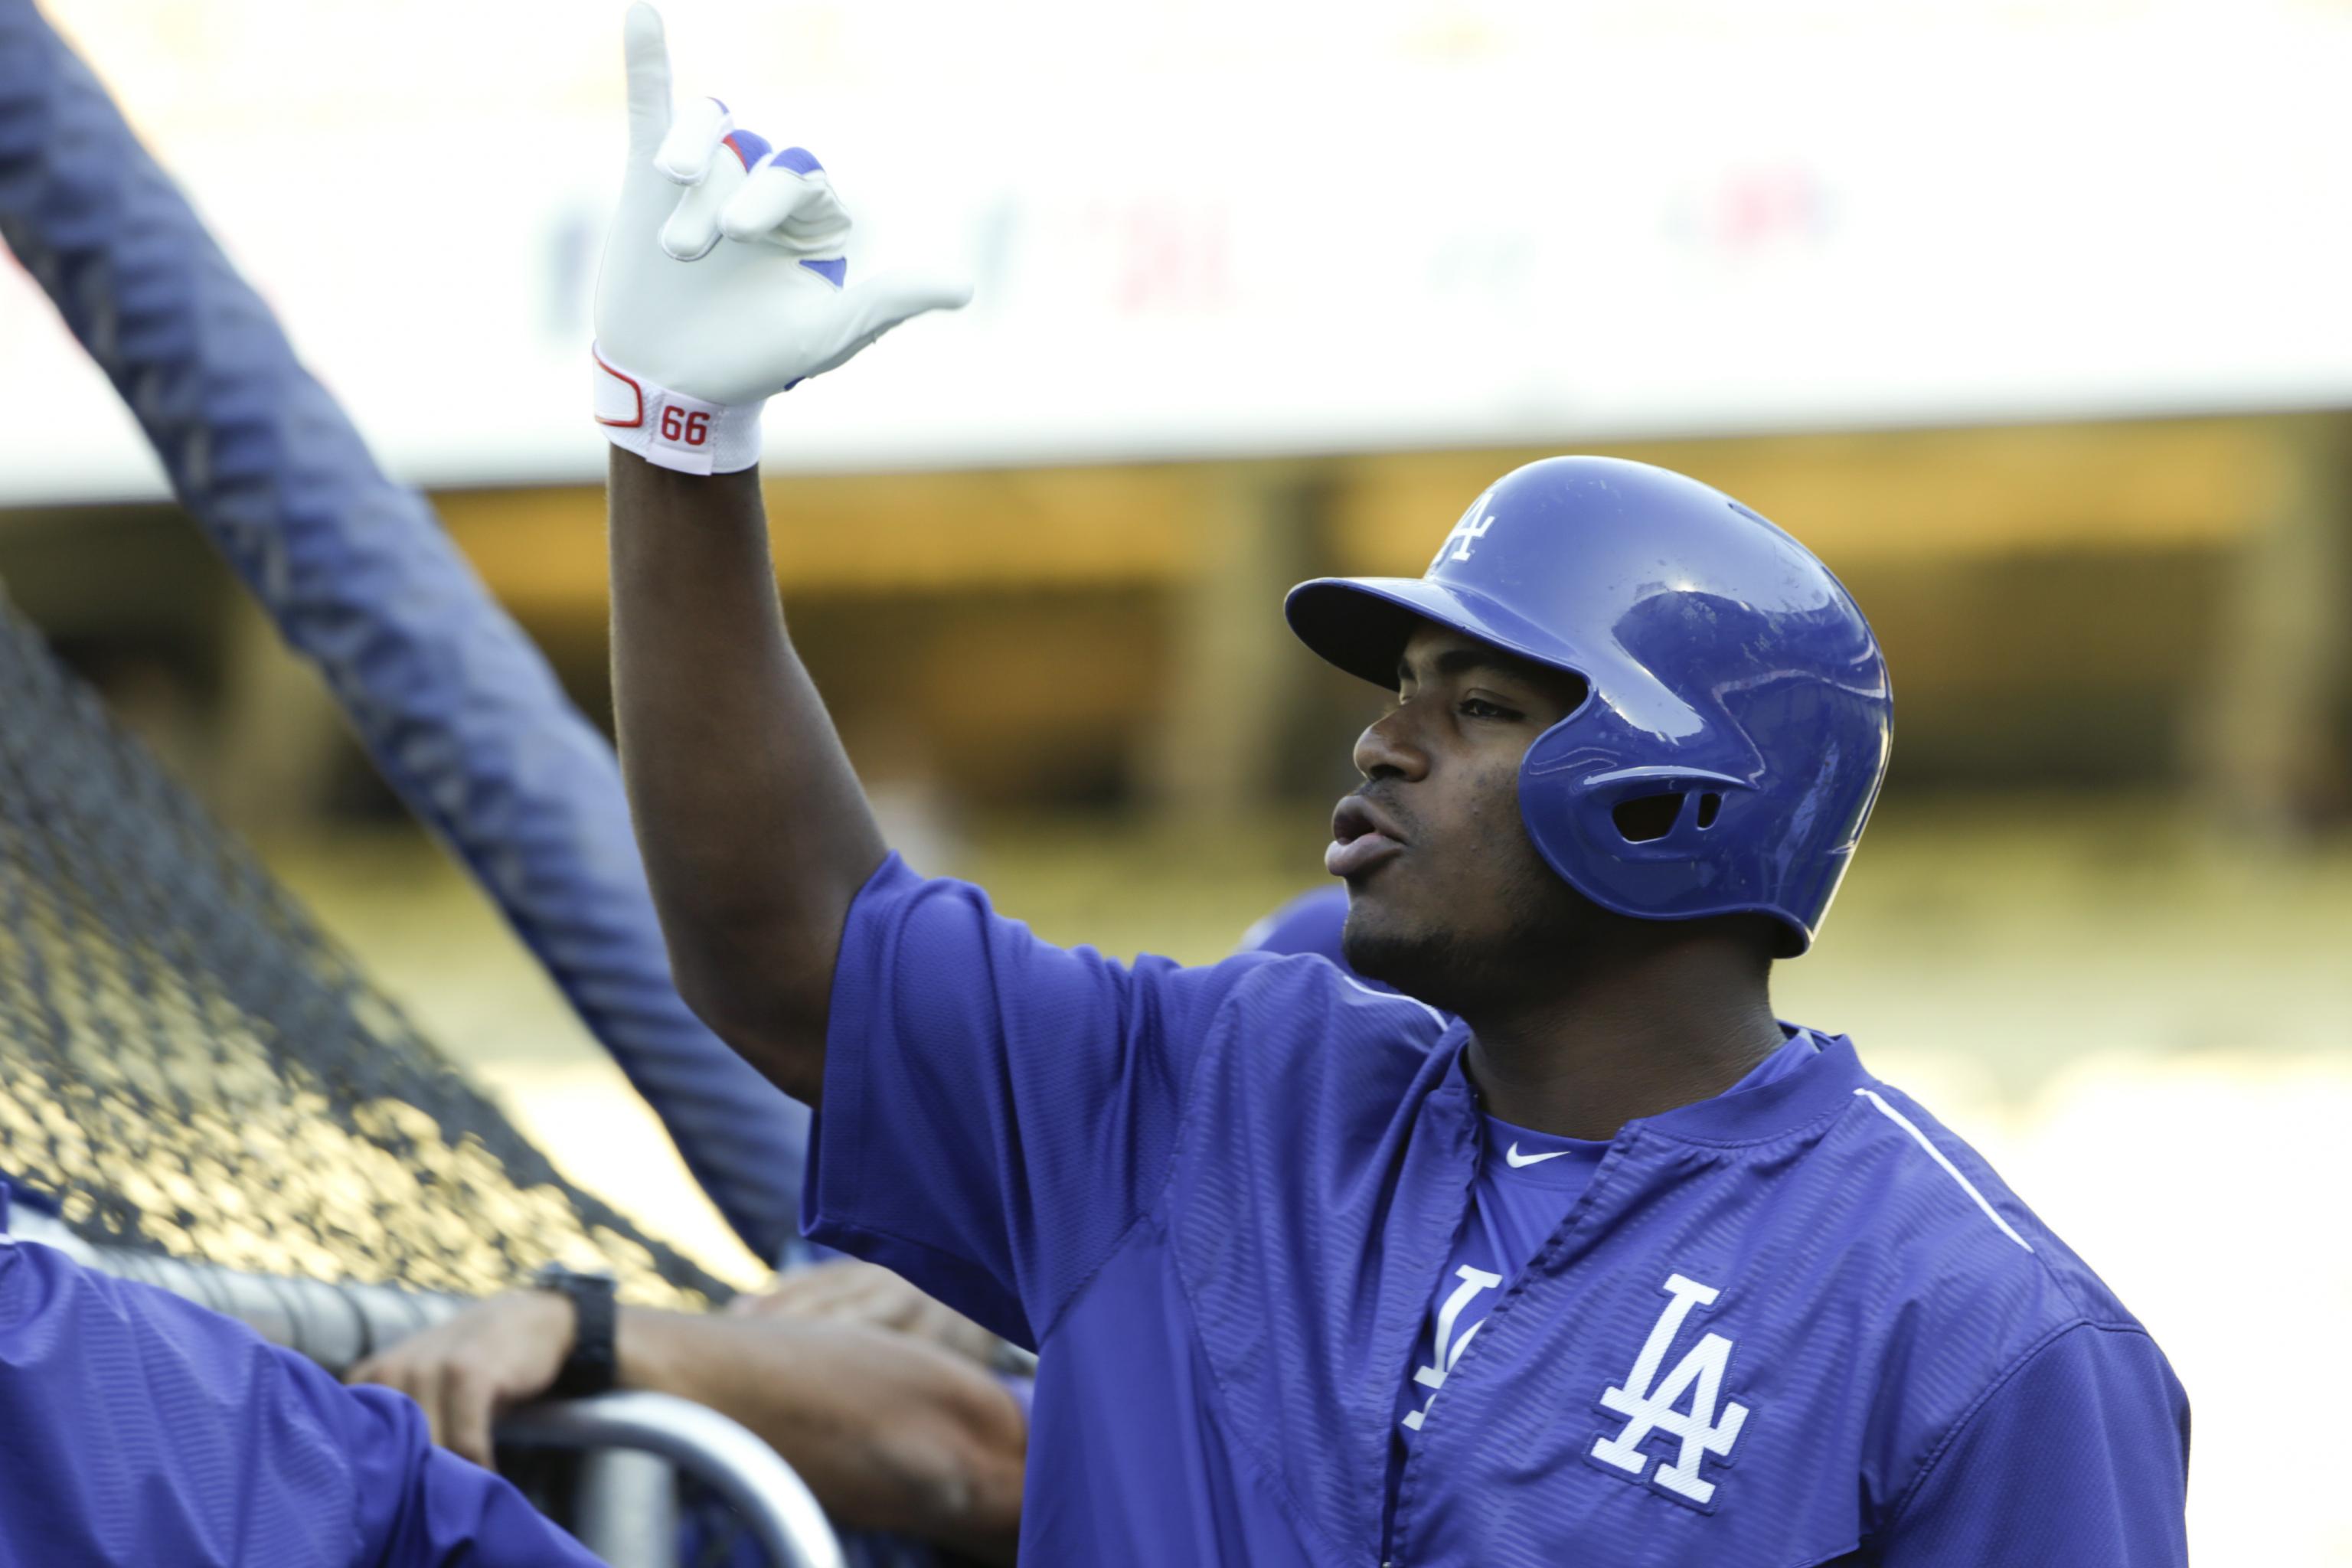 Yasiel Puig apologizes for not running out comebacker: 'That's not